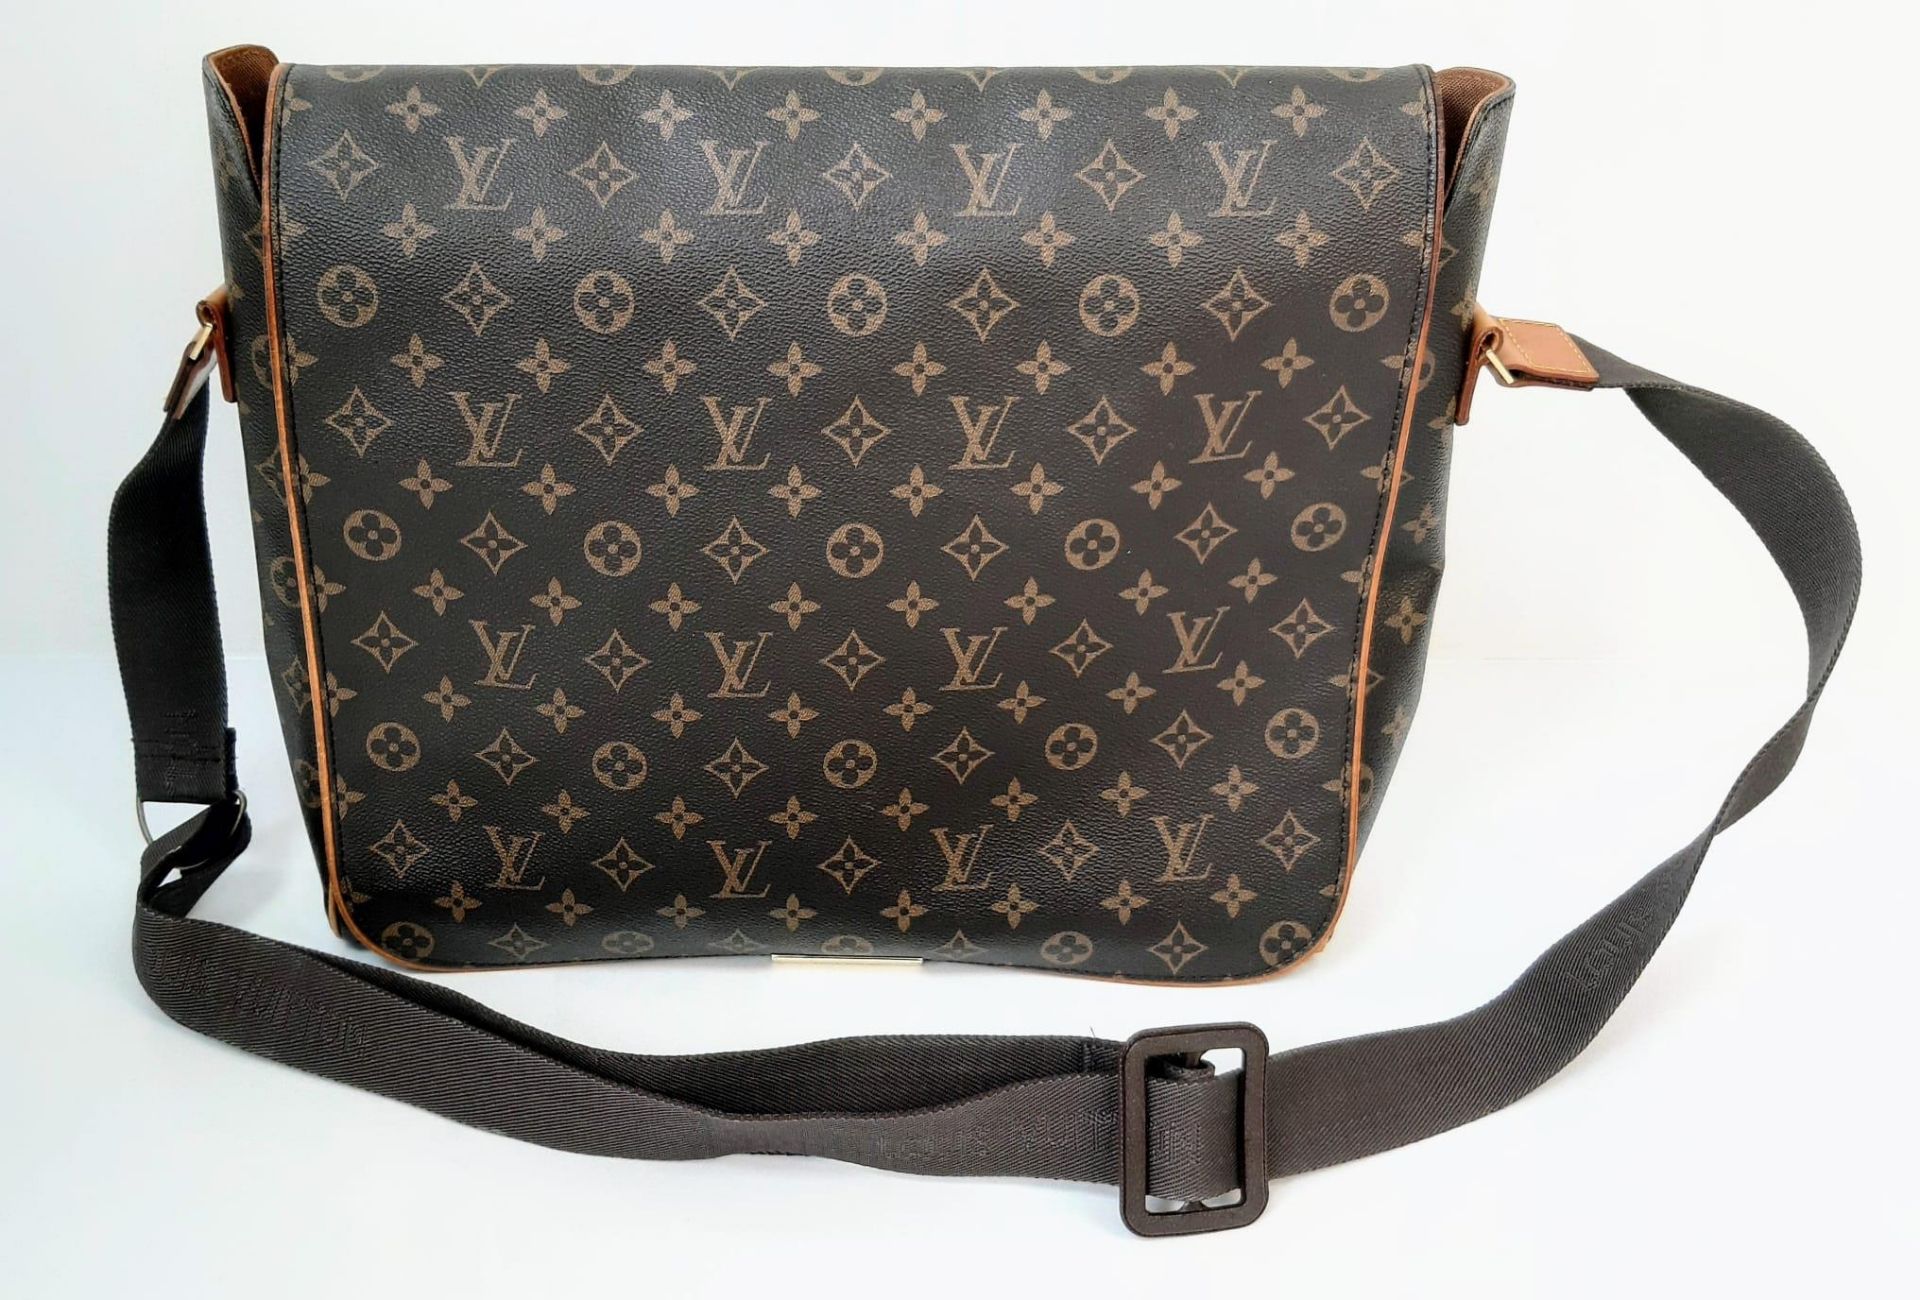 A Louis Vuitton Abbesses Messenger Bag. Monogram canvas exterior with brown leather trim. Sturdy